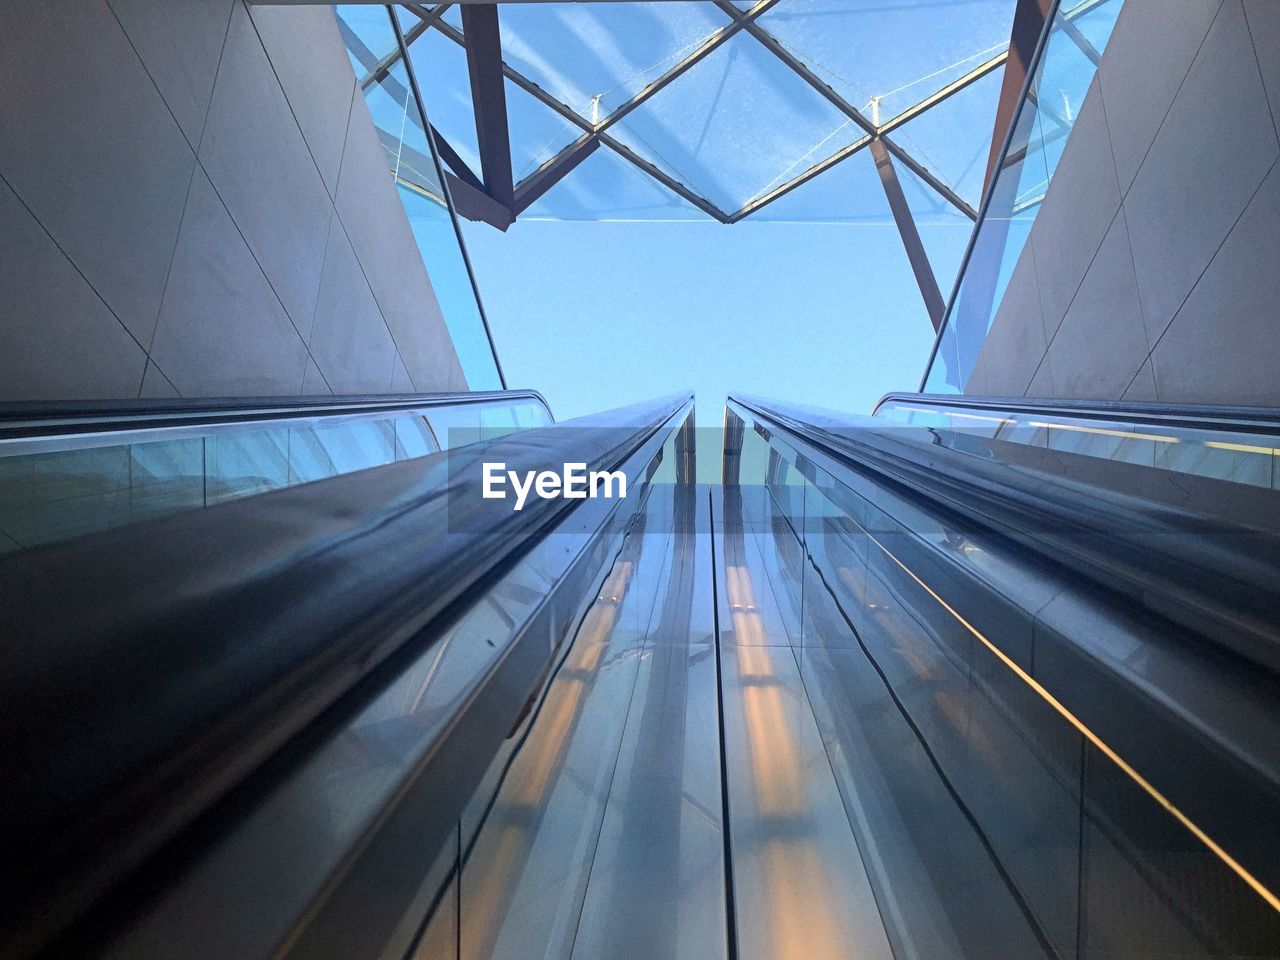 Low angle view of escalator railings against sky in city